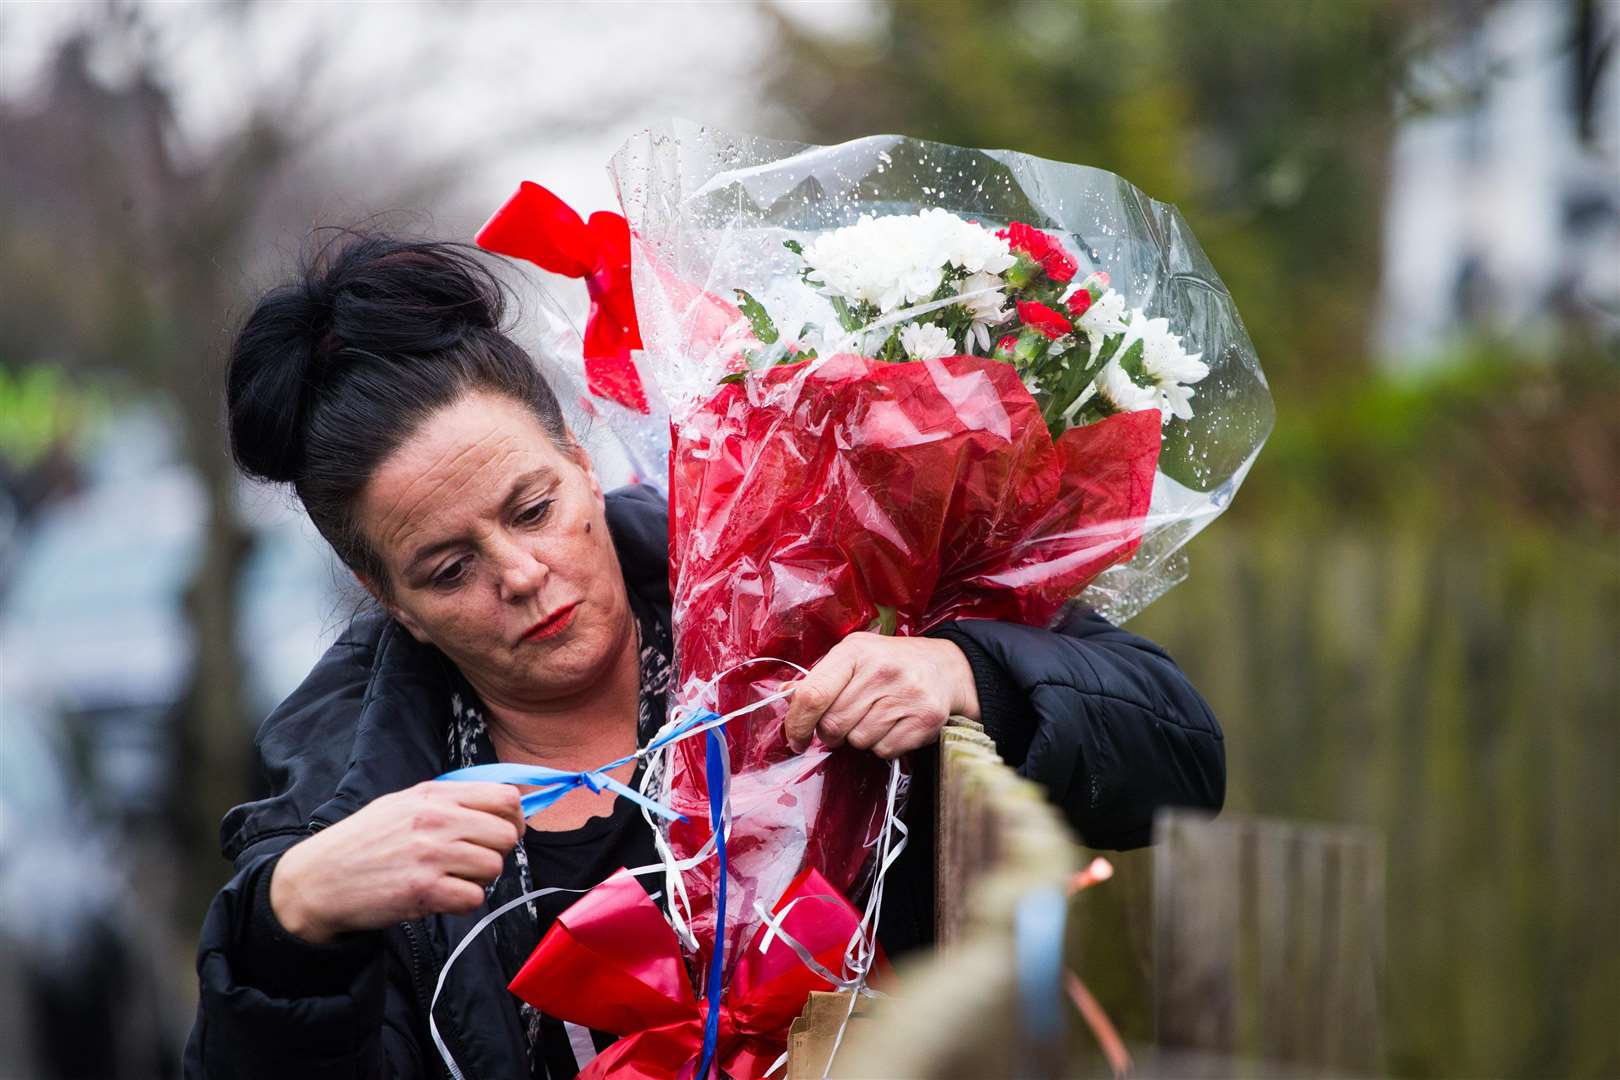 Confrontation erupted after flowers were placed at the site of the burglary Pictures: SWNS